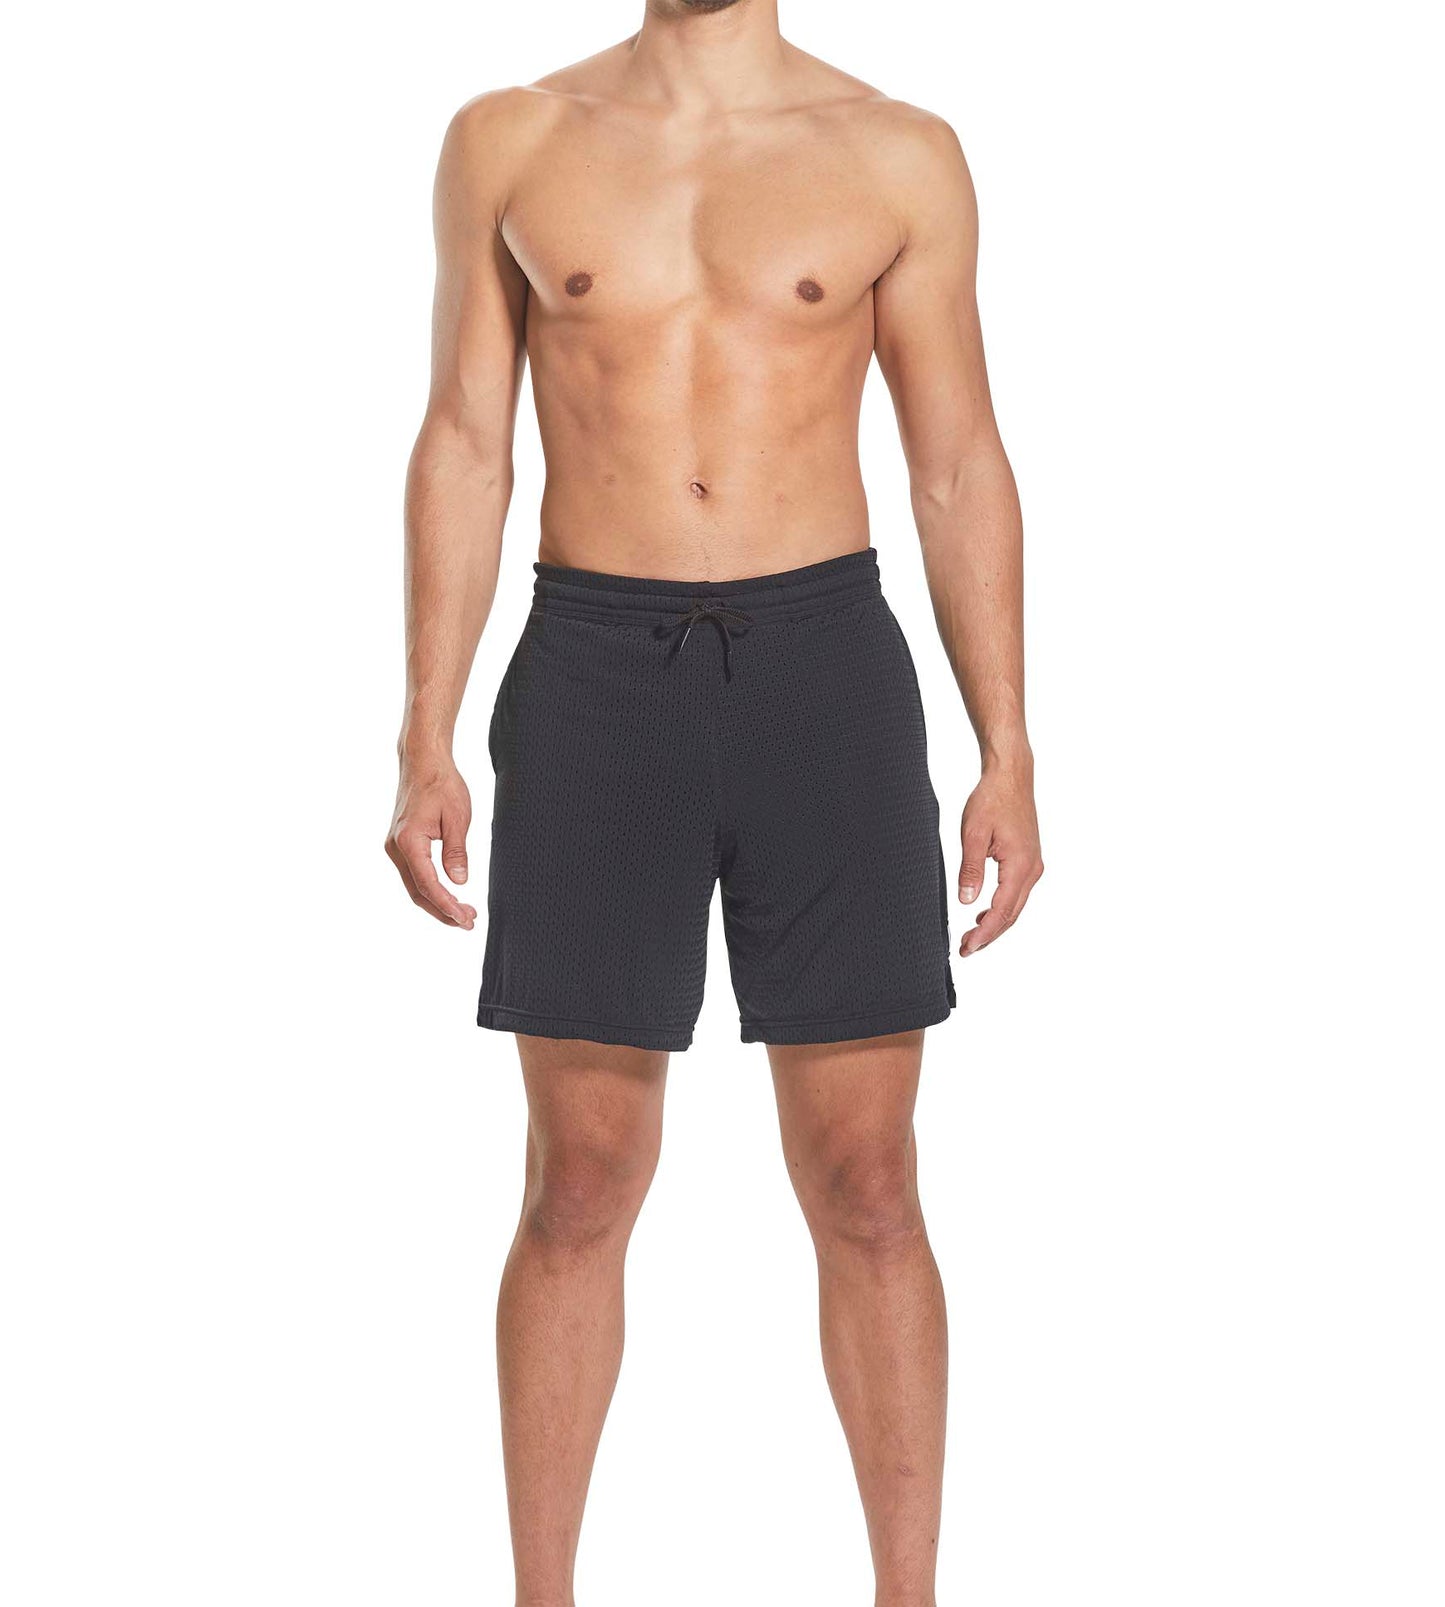 SuperFit Mesh Lounge Shorts contains colors Sienna, Rosy brown, Dark slate gray, Burly wood, Indian red, Dark salmon, Indian red, Burly wood, Dark slate gray